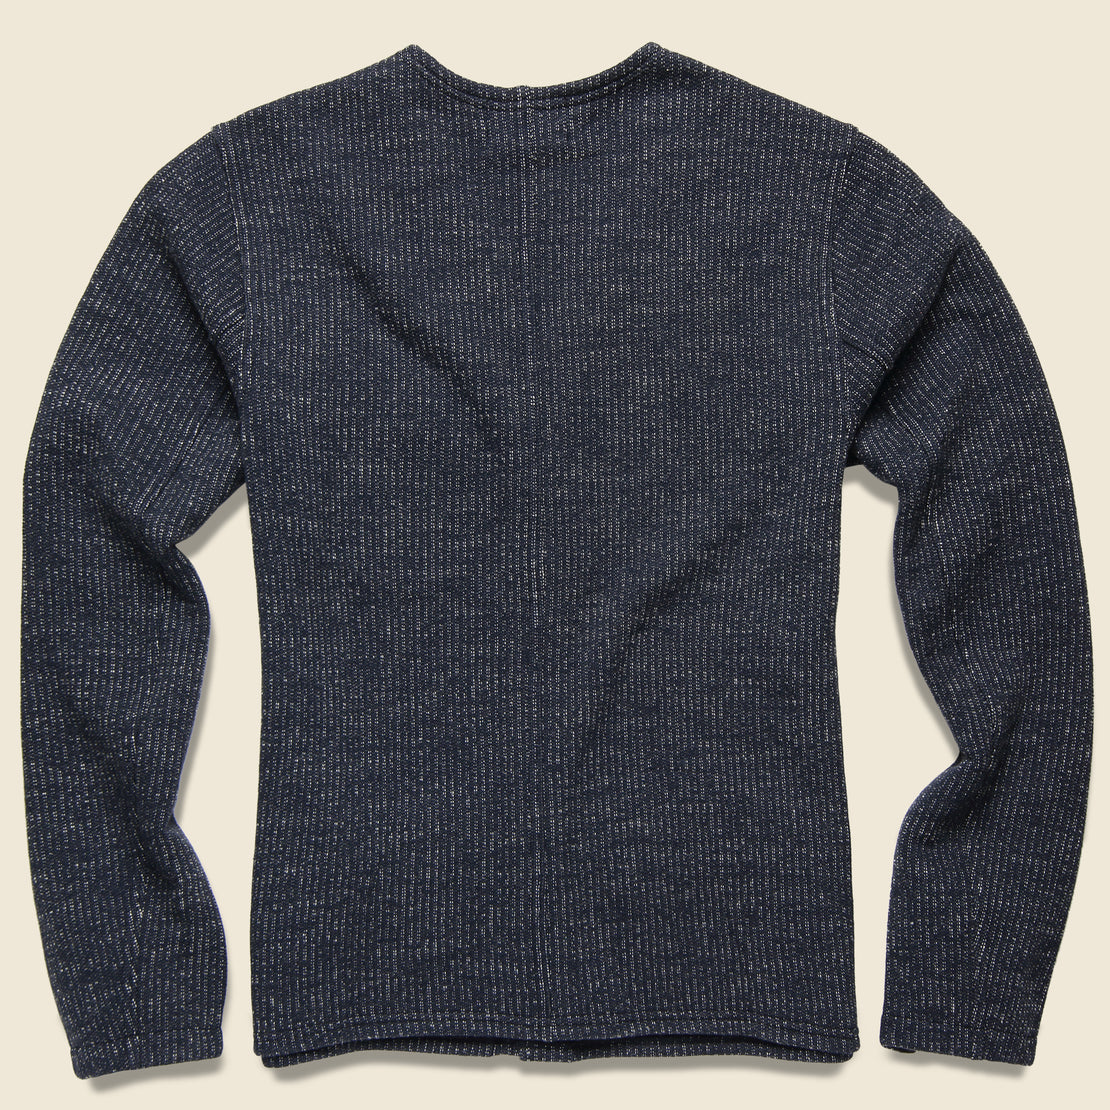 Browns Beach Cardigan - Navy - RRL - STAG Provisions - Tops - Sweater